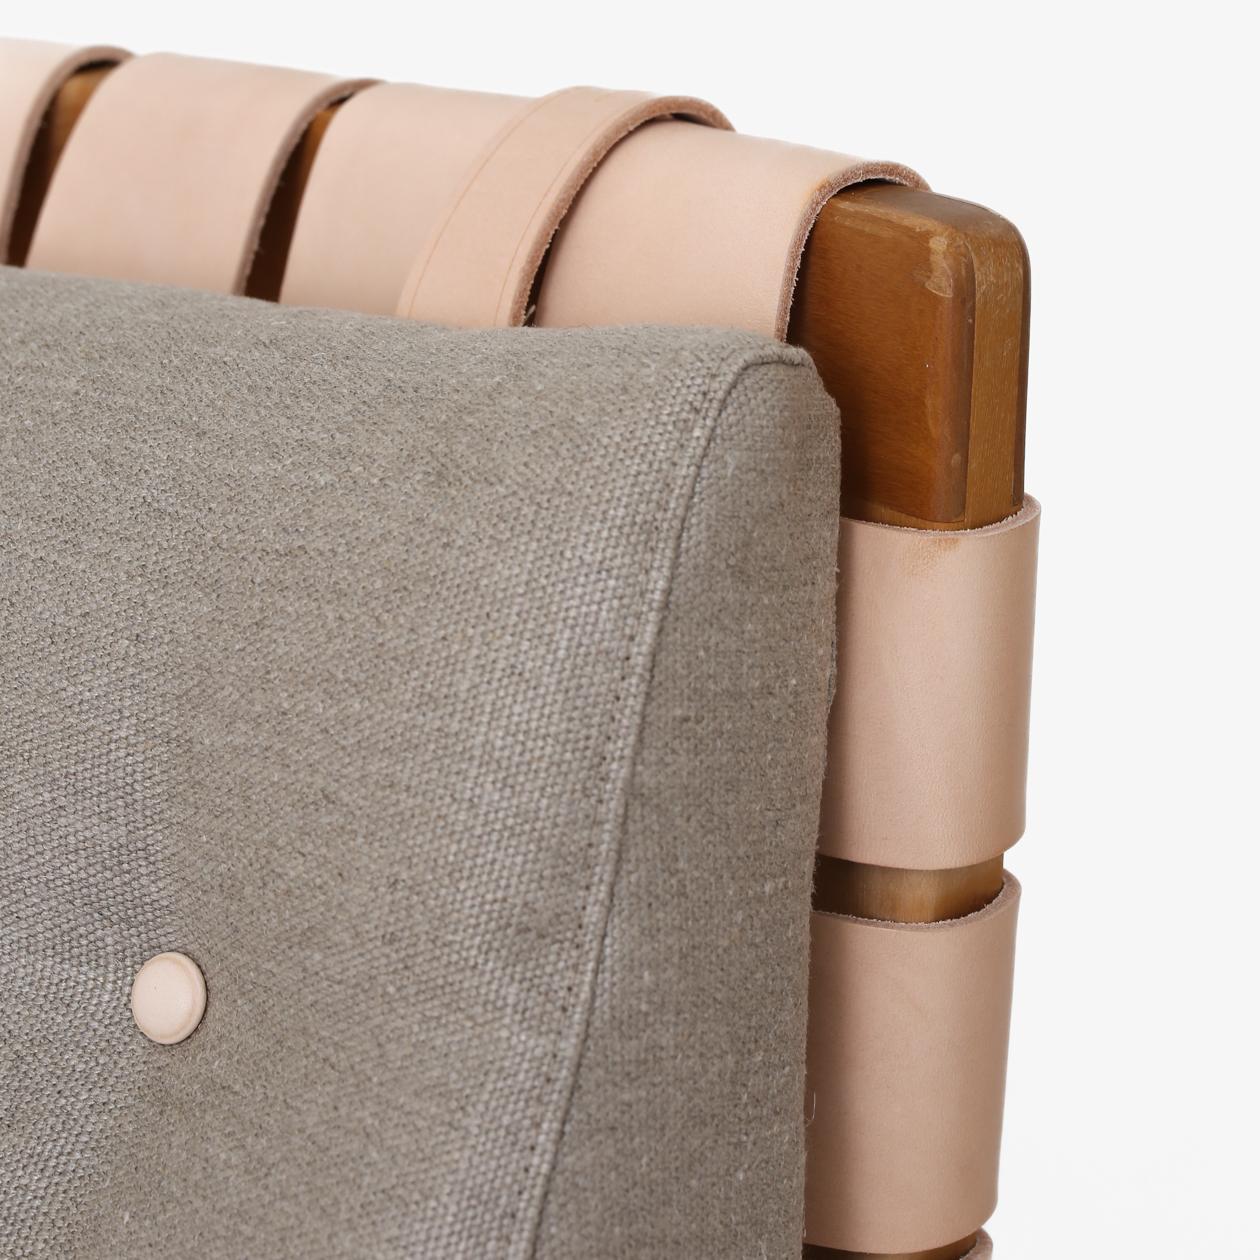 Pernilla 3 - Chaise longue with new braided core leather and cushion in washed canvas. Bruno Mathsson / Värnamo.